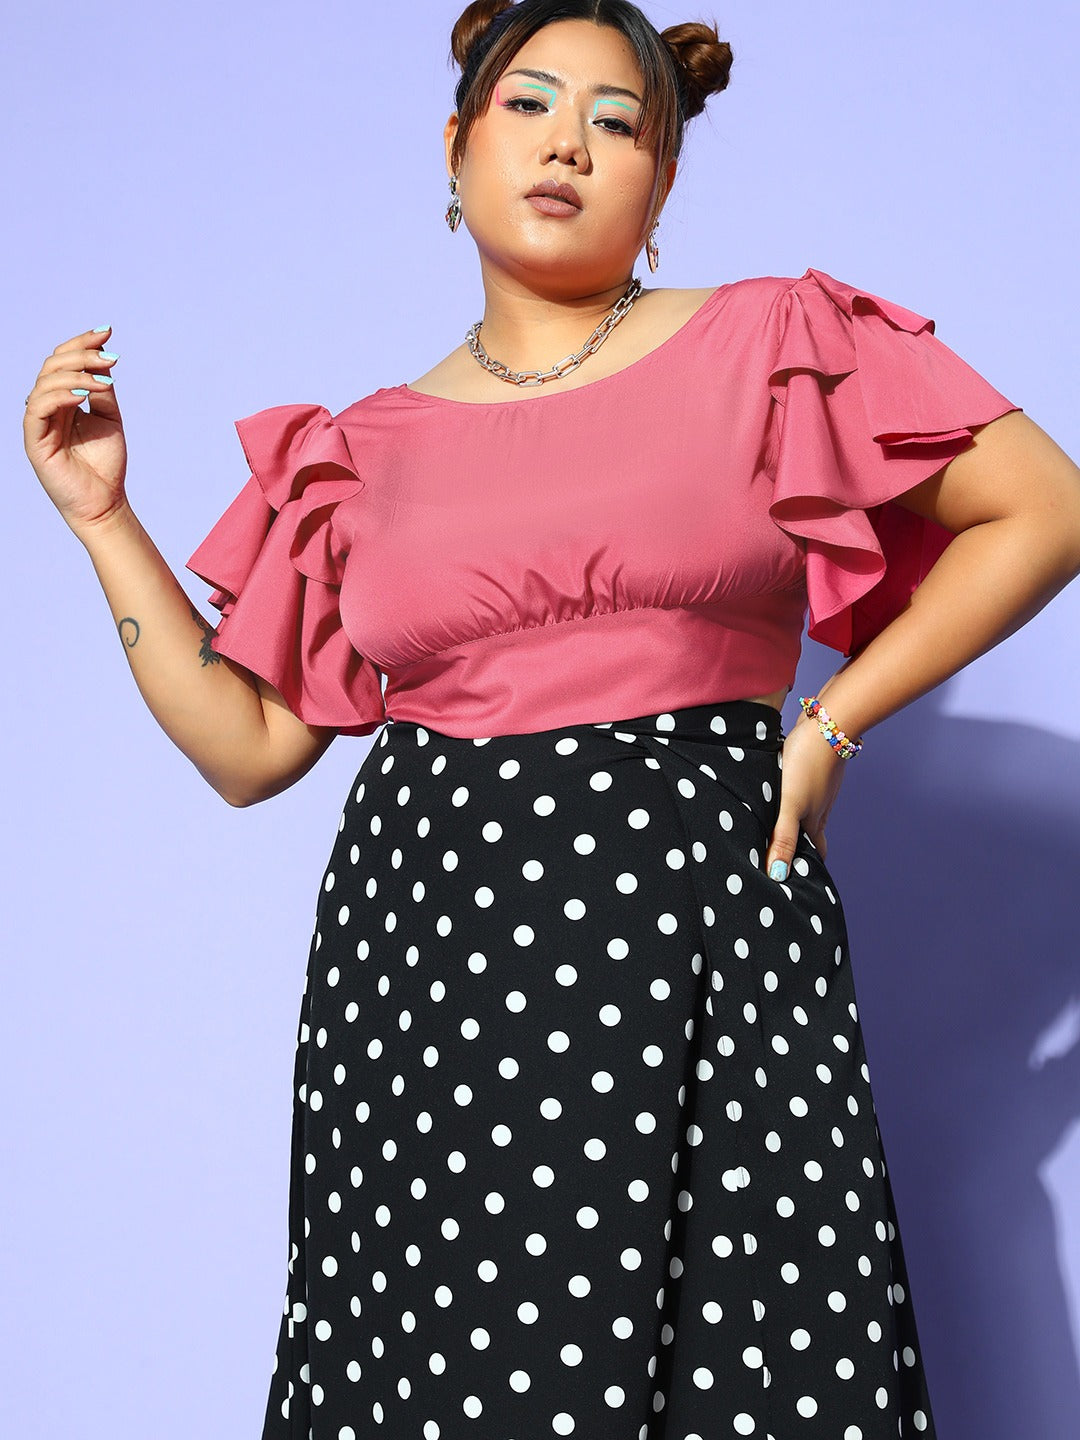 high waist skirt and crop top for plus size